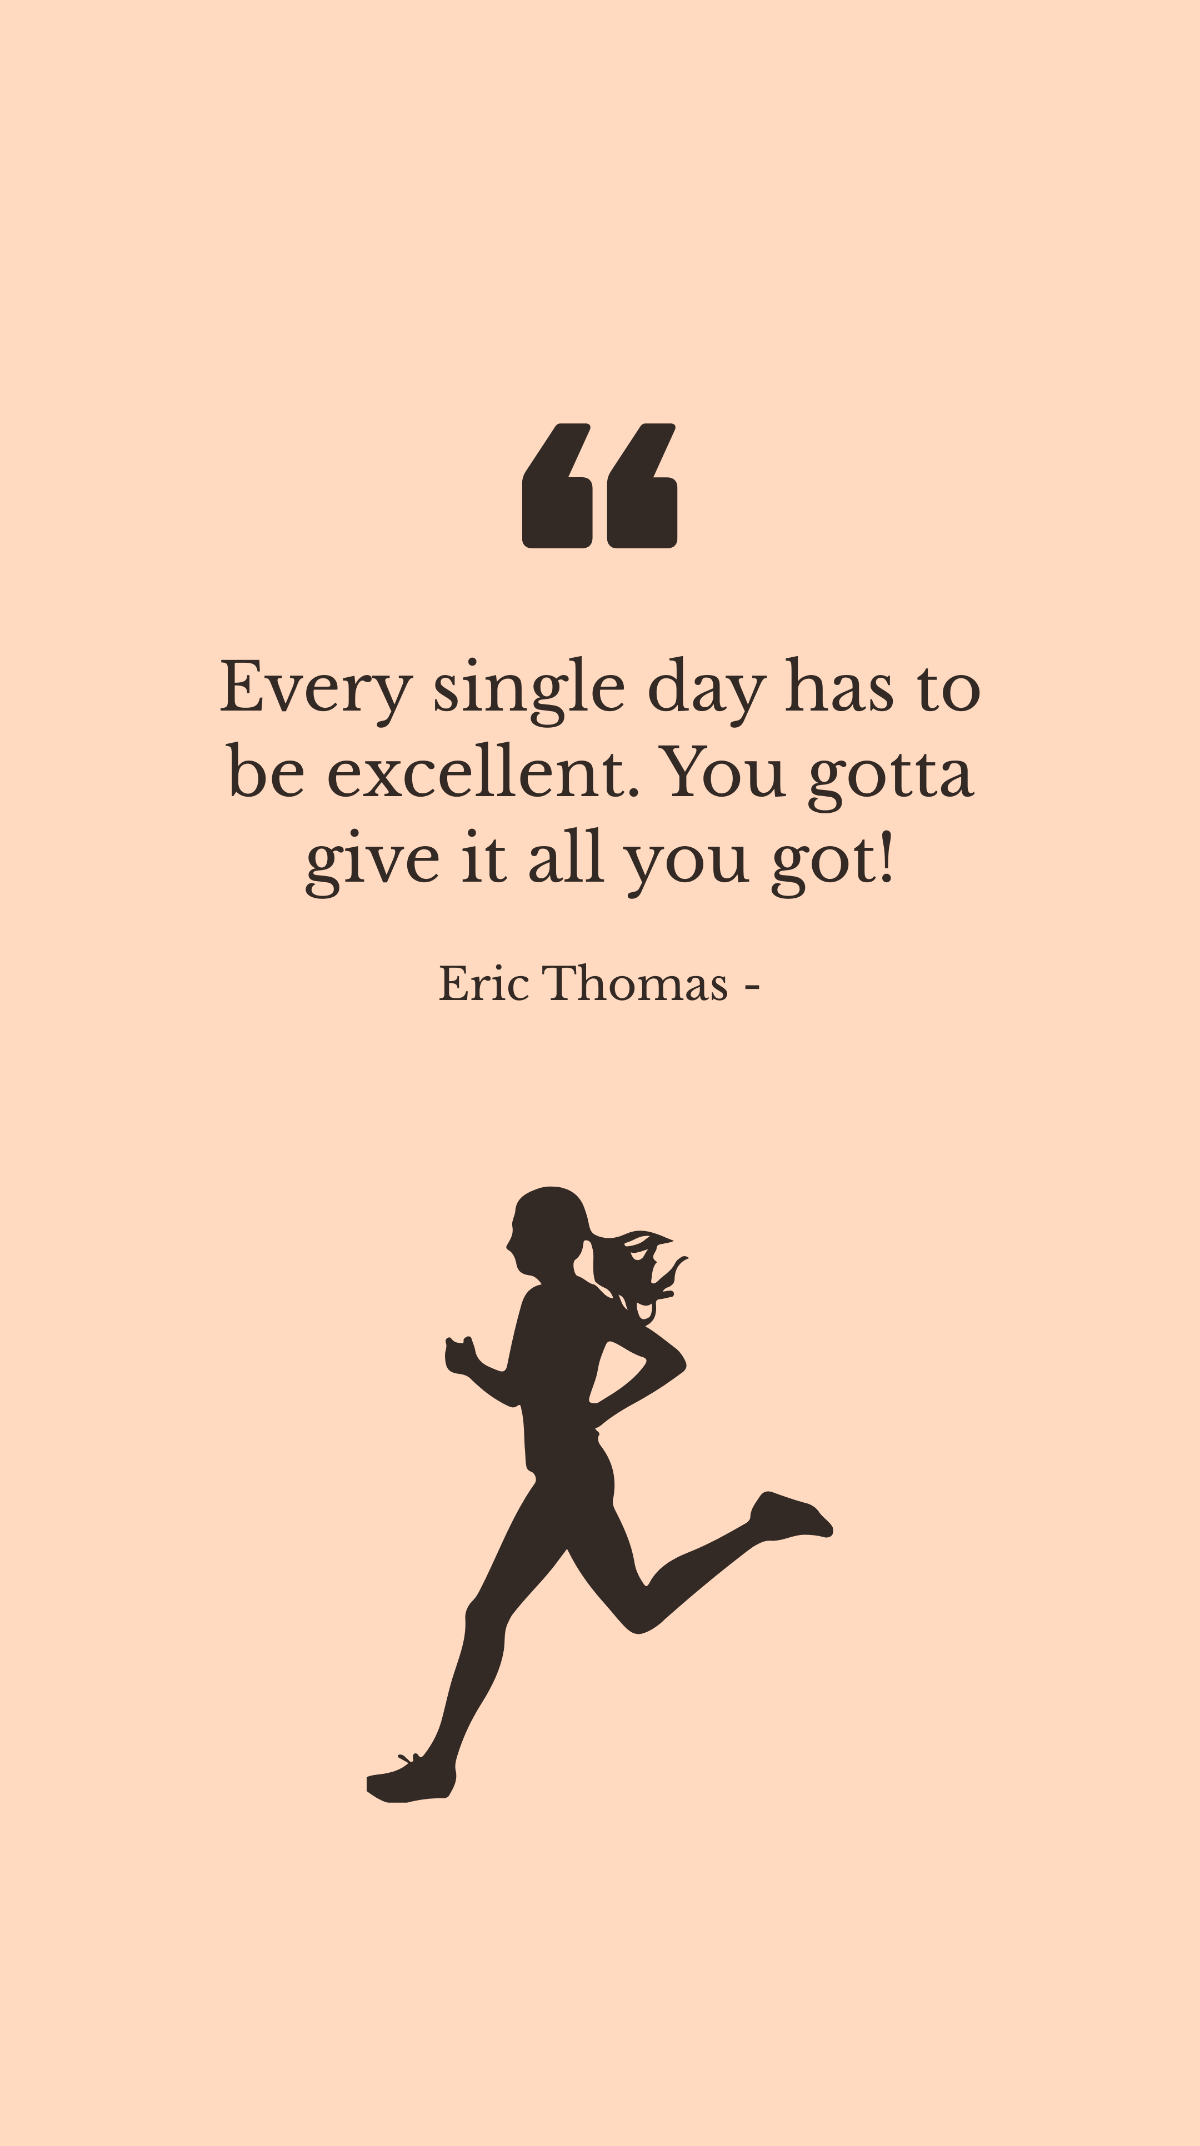 Eric Thomas - Every single day has to be excellent. You gotta give it all you got!